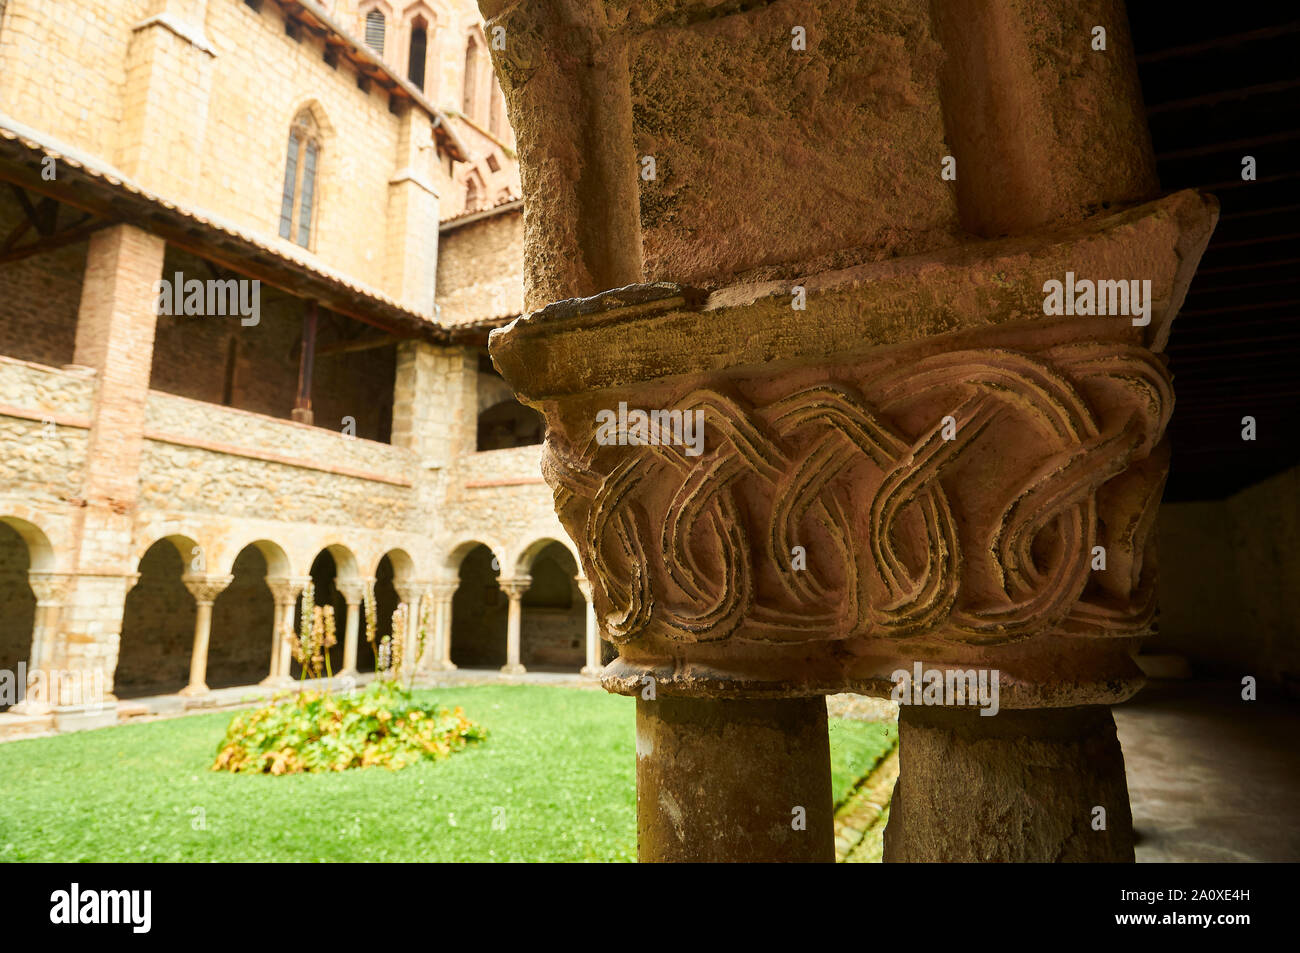 Decorated chapiter in the romanesque cloister of Saint-Lizier Cathedral historical monument (Saint-Lizier, Ariège, Occitanie, Pyrenees, France) Stock Photo